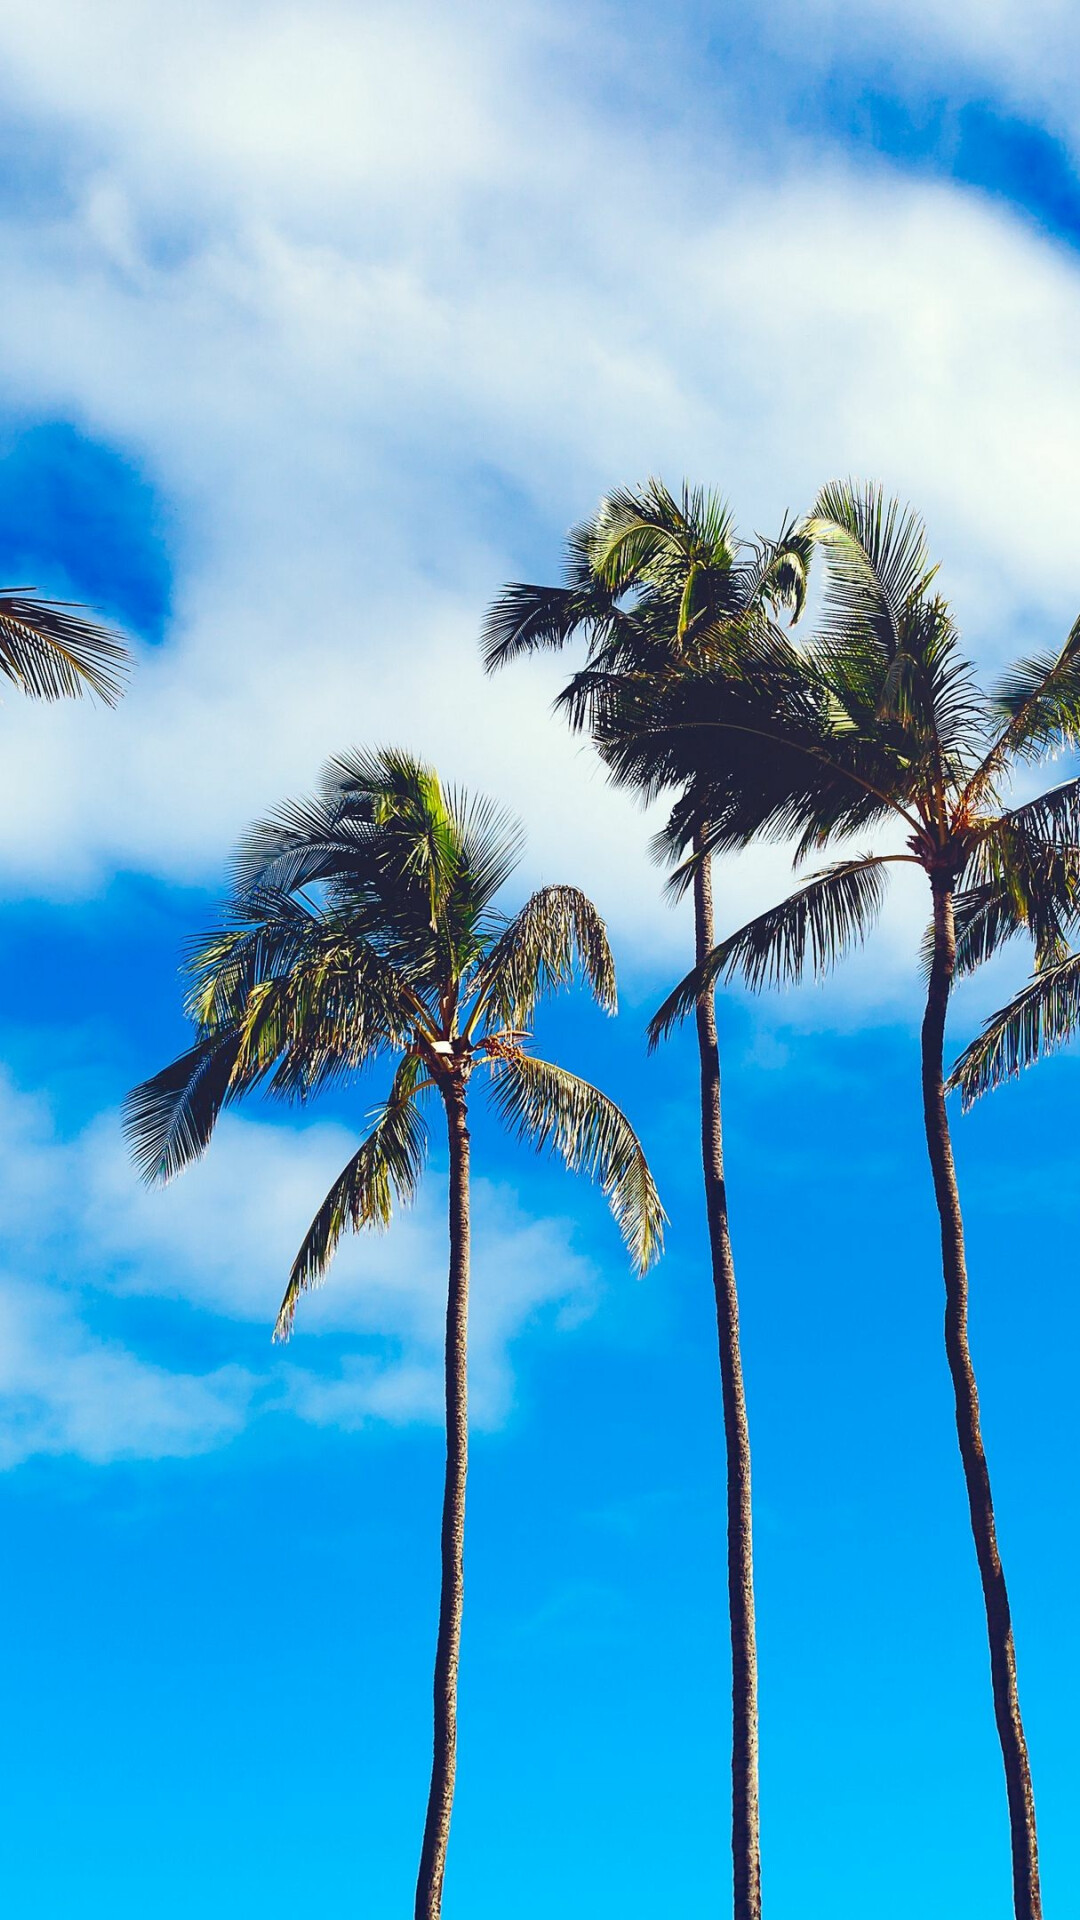 Palm Tree: Known for their long, slender trunks and thin fronds and are closely identified with tropical locations. 1080x1920 Full HD Background.